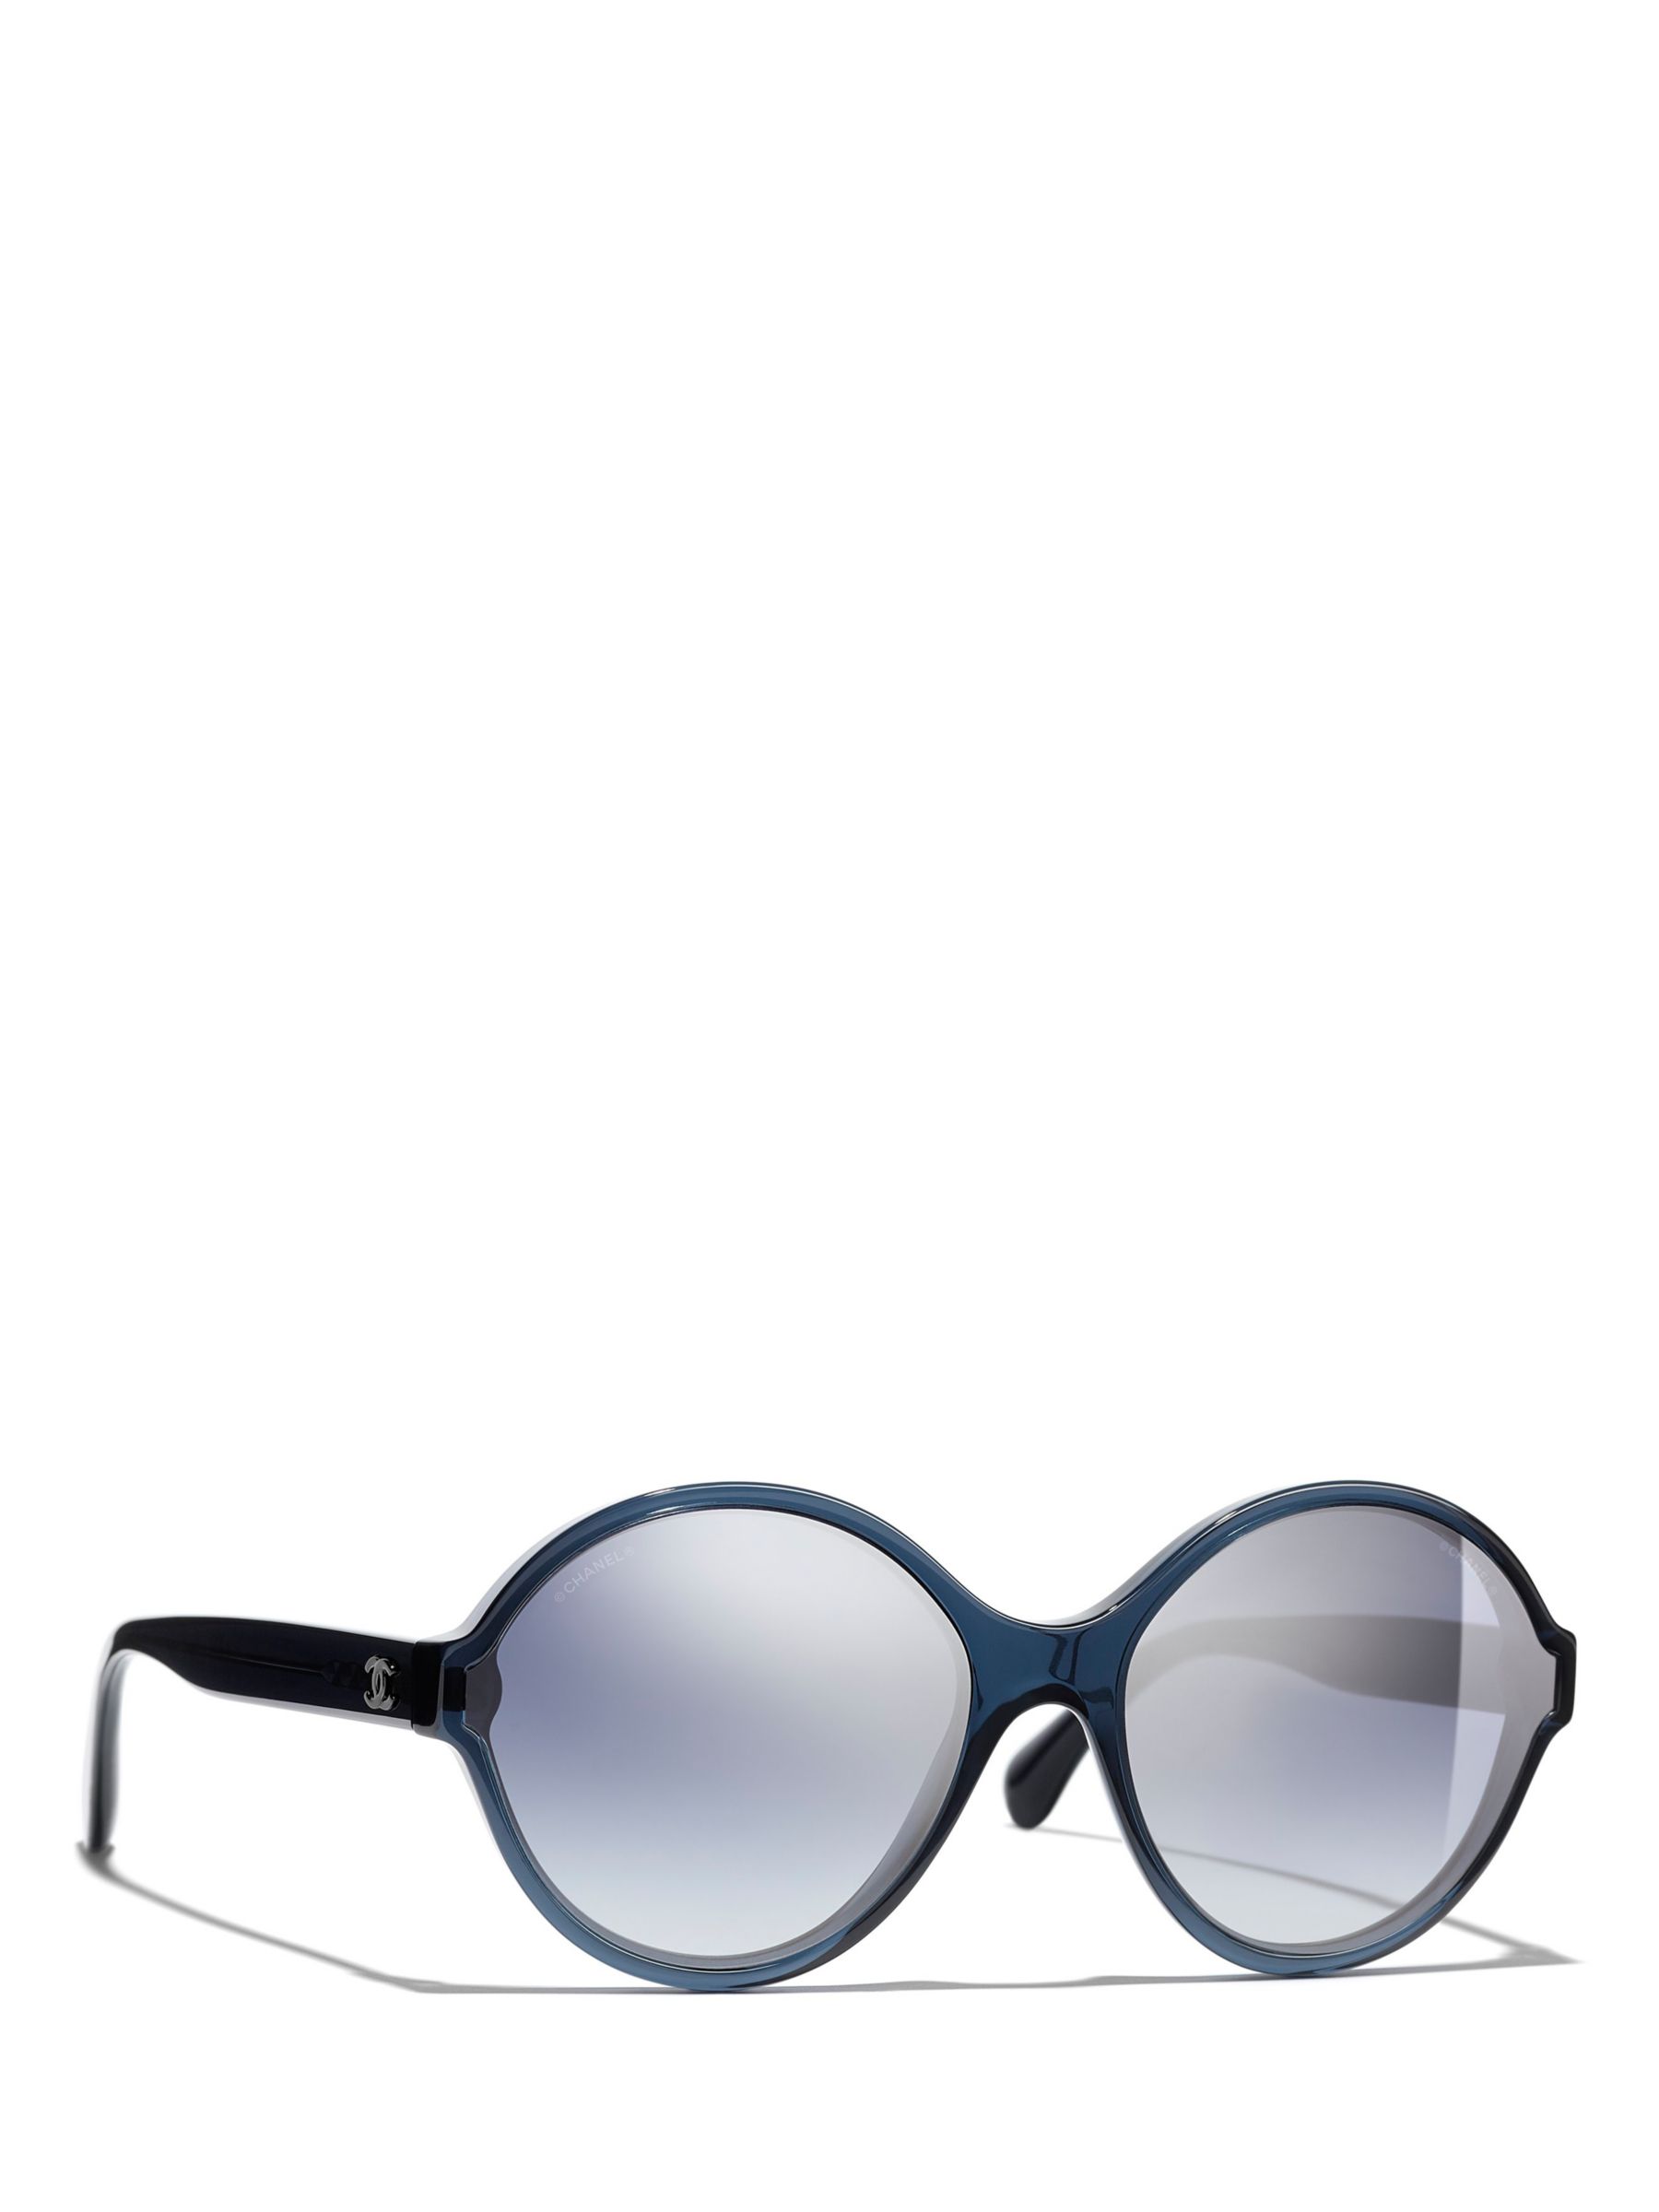 CHANEL Round Sunglasses CH5387 Blue/Clear Blue